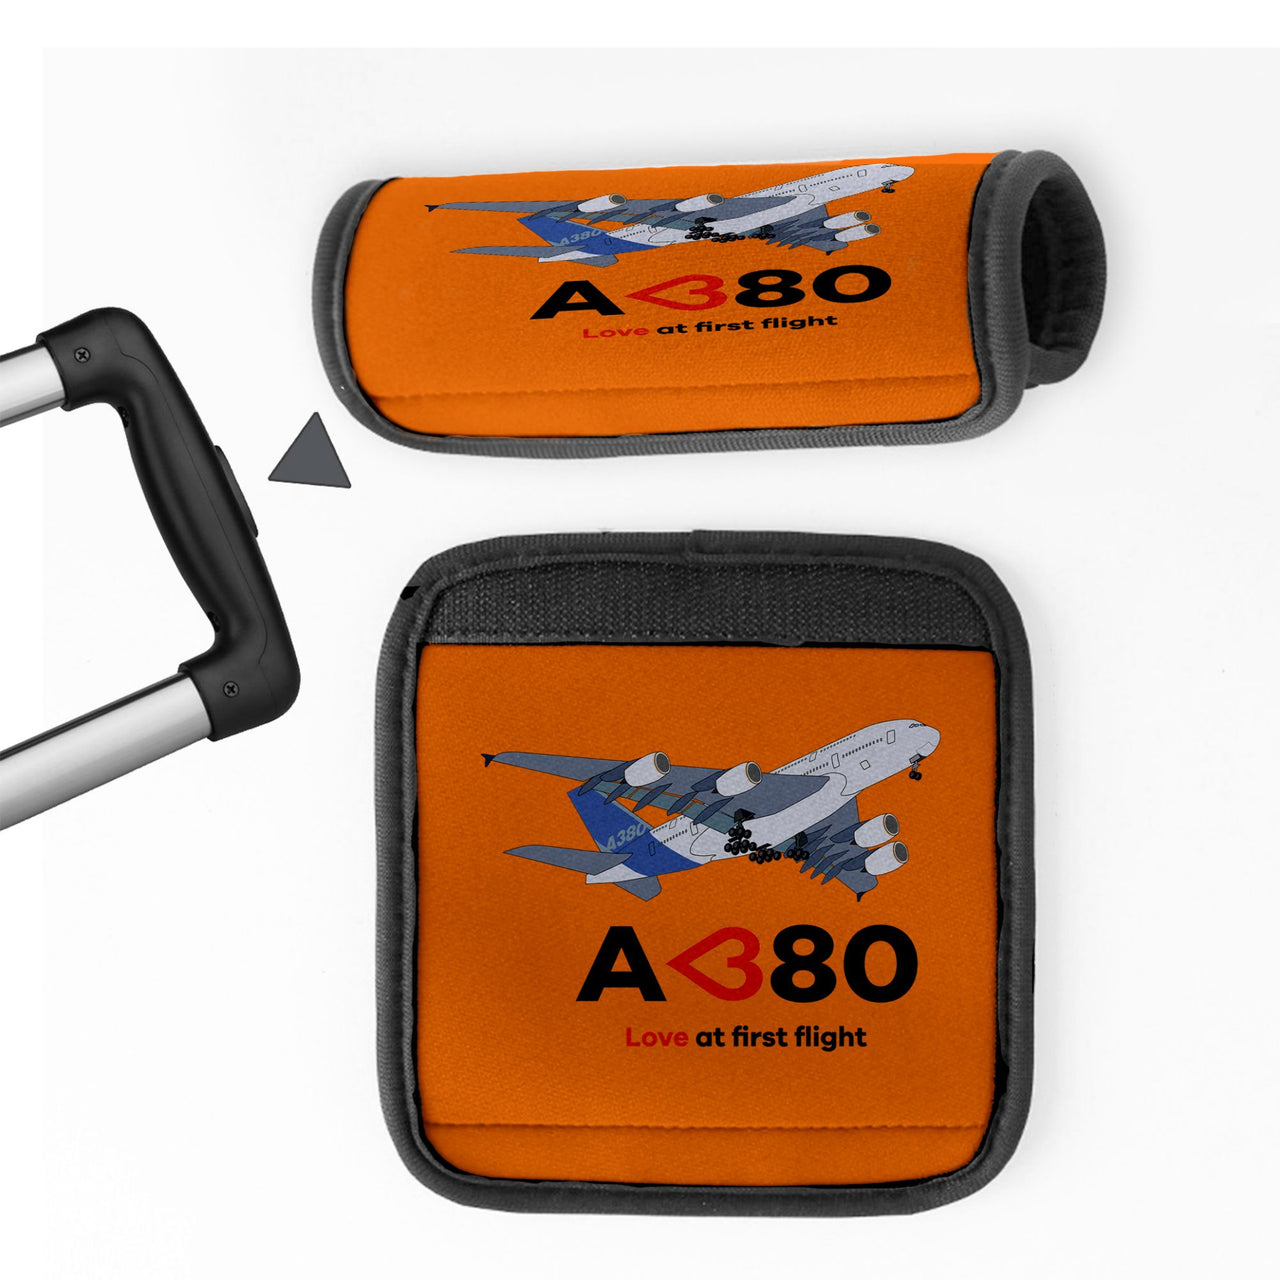 Airbus A380 Love at first flight Designed Neoprene Luggage Handle Covers